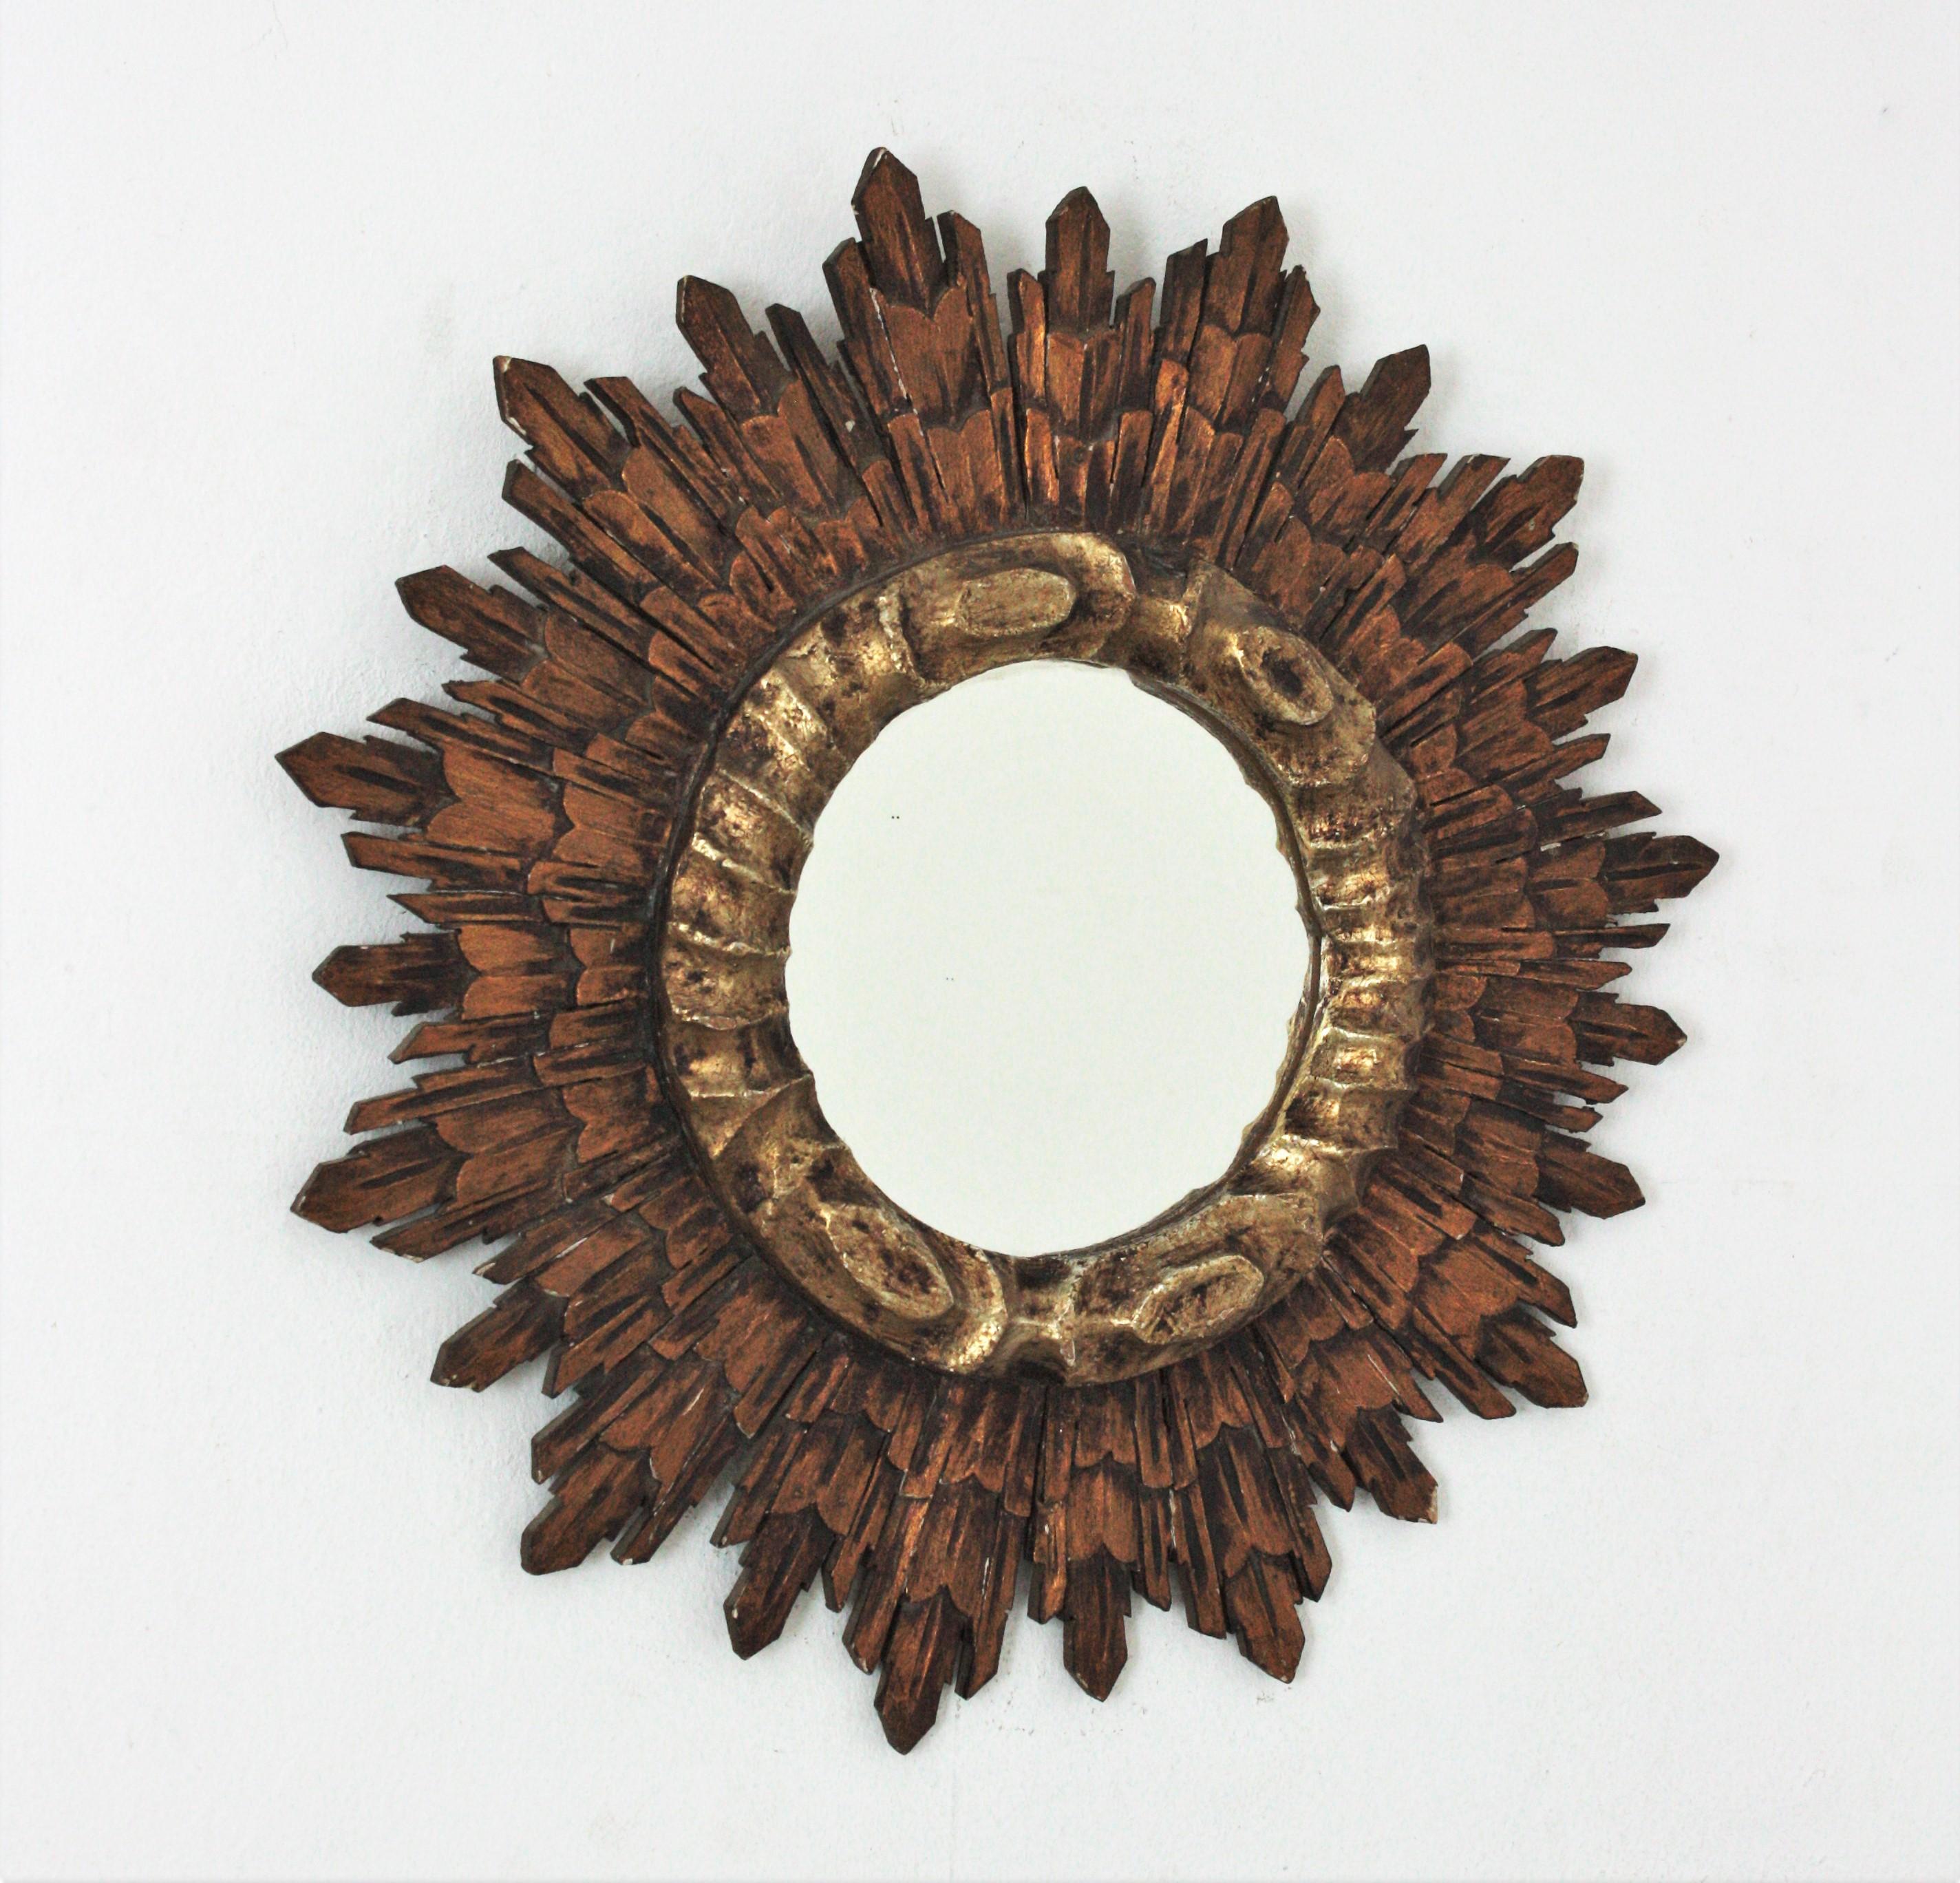 Outstanding Baroque style silver and gold leaf giltwood carved sunburst mirror, Spain, 1930s-1940s.
The carved wood frame is finished with gesso and gold leaf gilding in bronze tone. The central patterned frame surrounding the round glass is